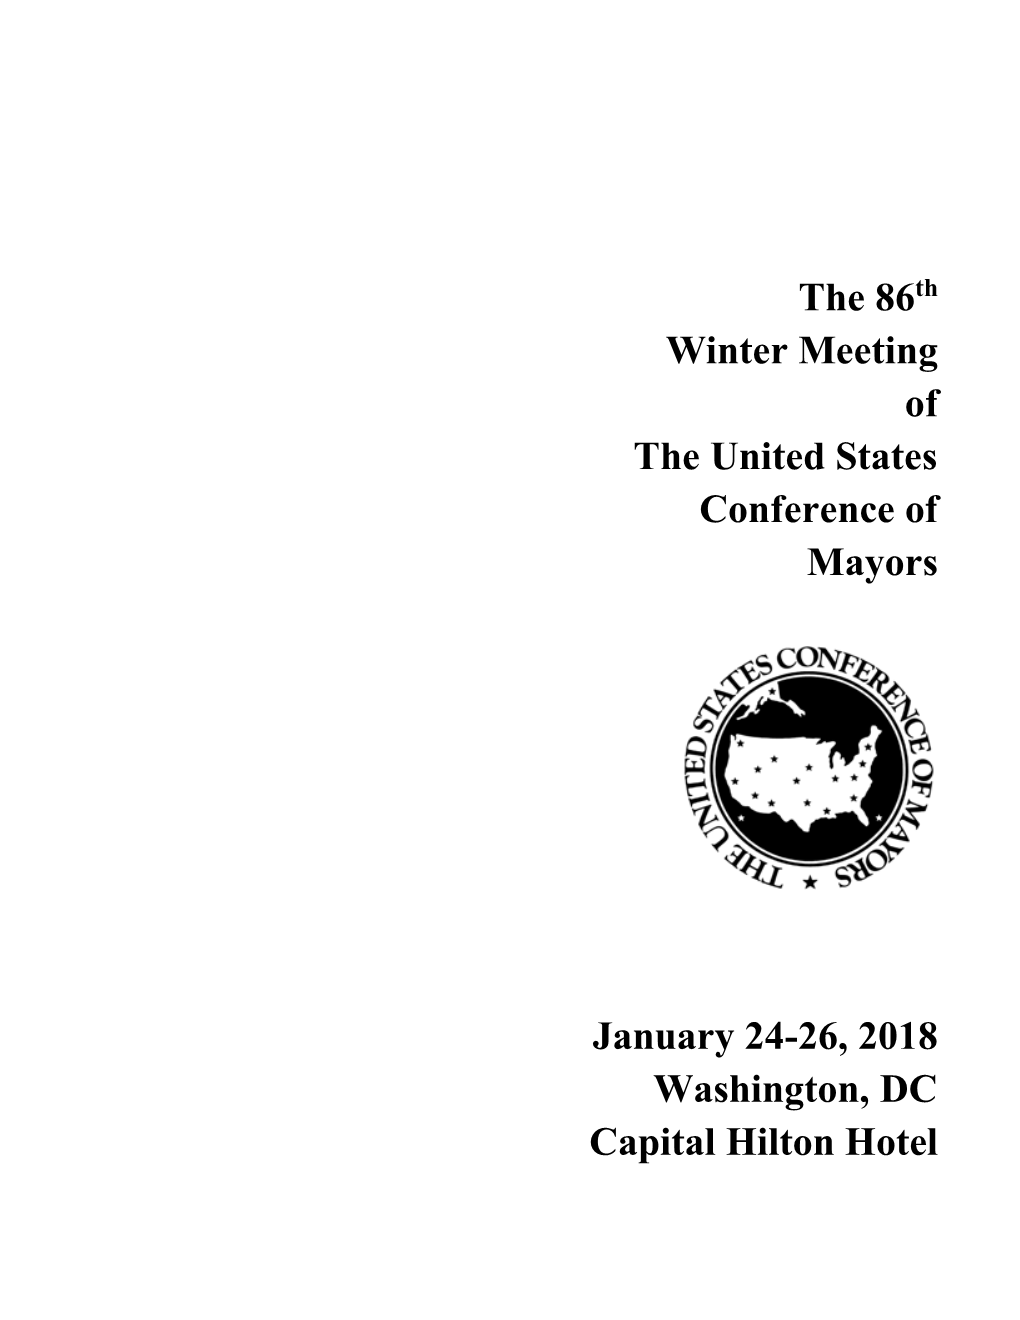 The 86 Winter Meeting of the United States Conference of Mayors